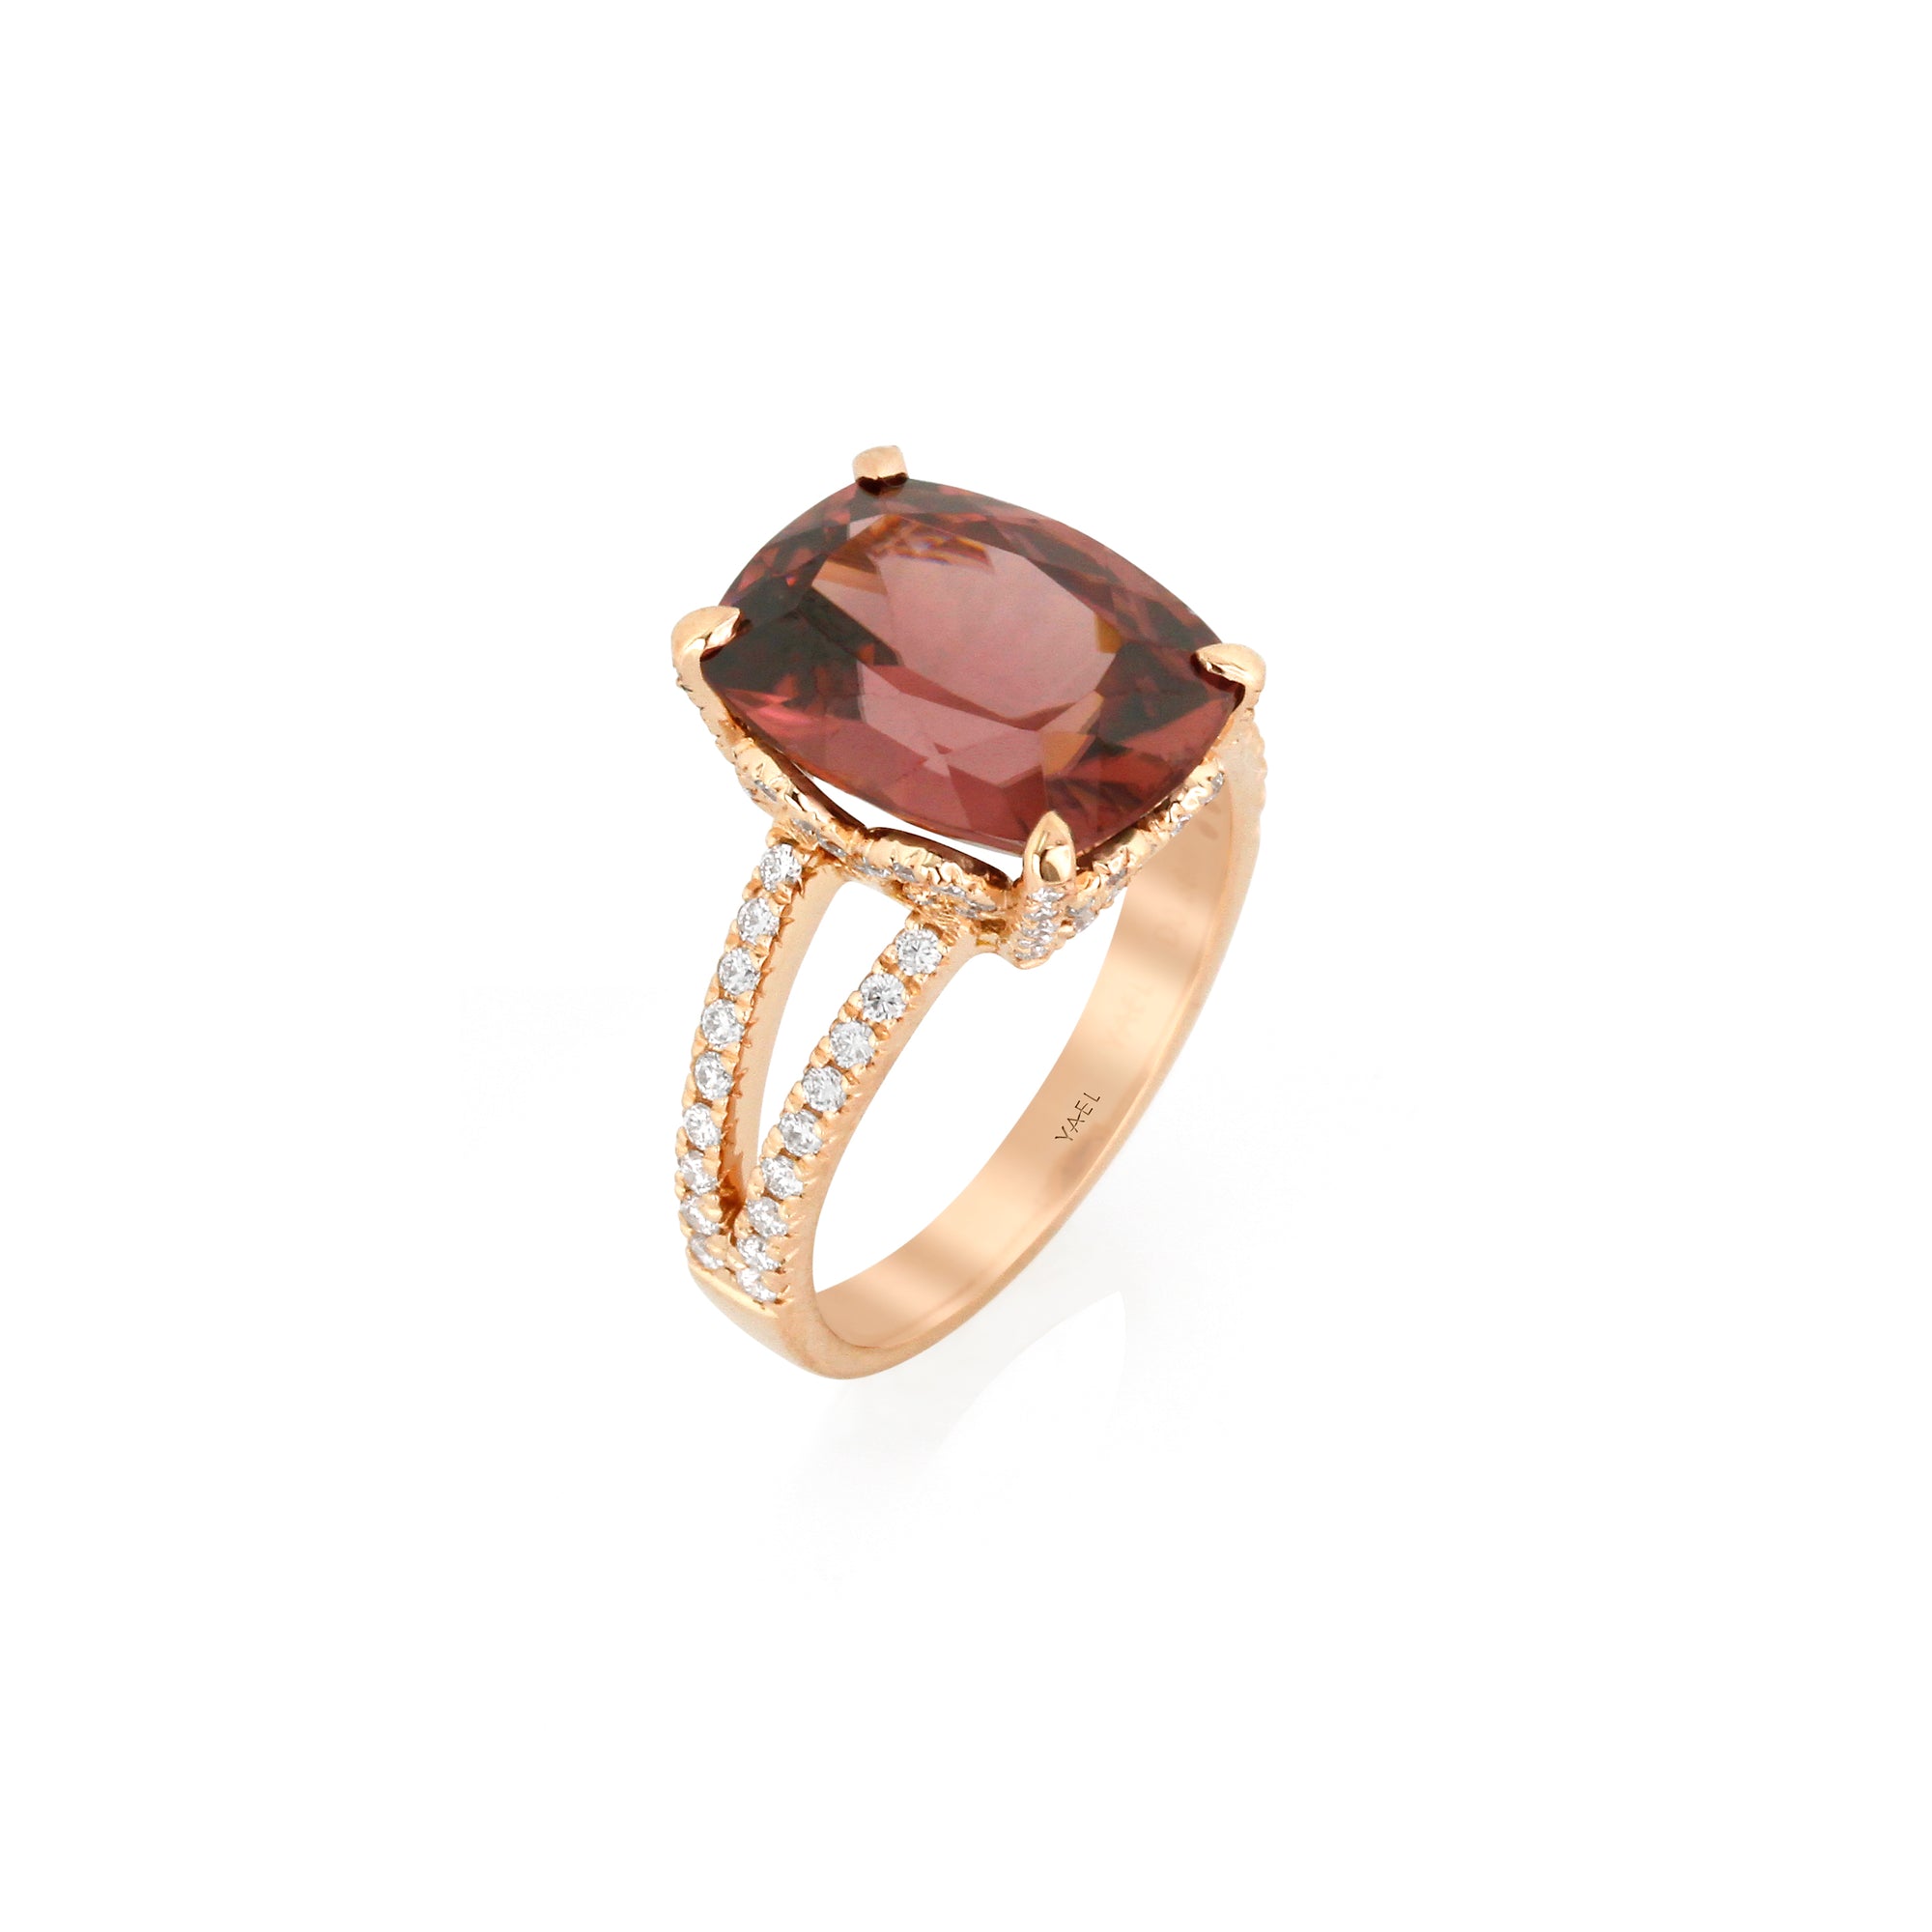 Cinnamon Zircon and Diamond Ring by Yael in 18k Rose Gold - Talisman Collection Fine Jewelers